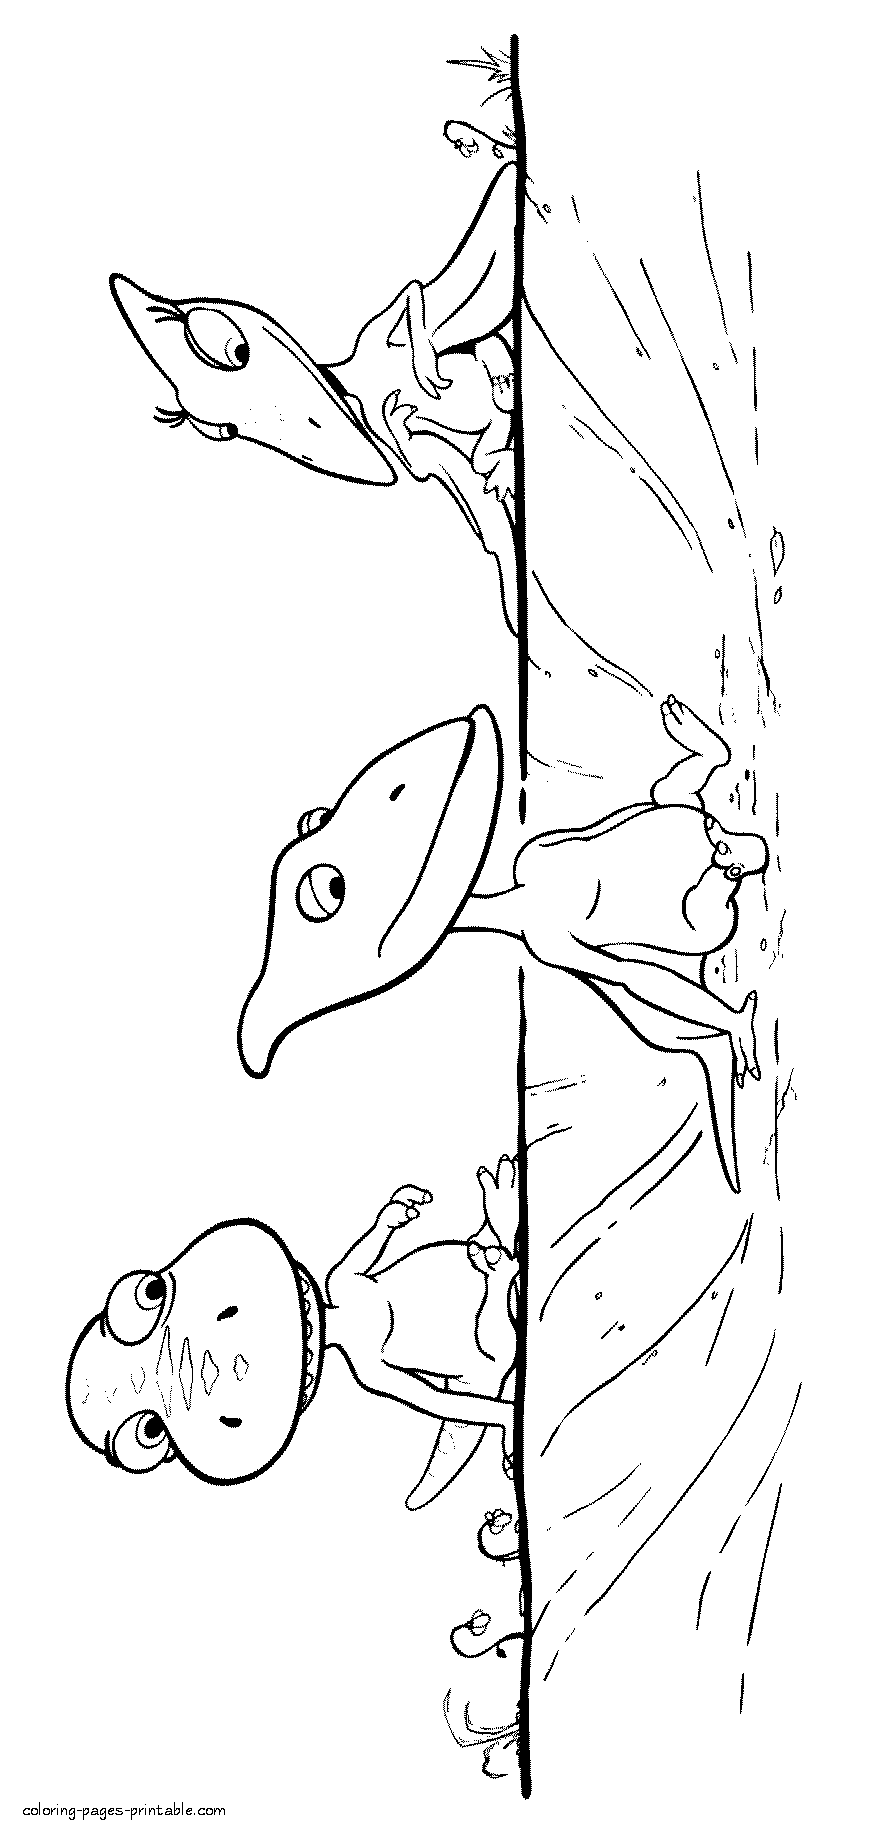 Dinosaur Train coloring pages printable and free